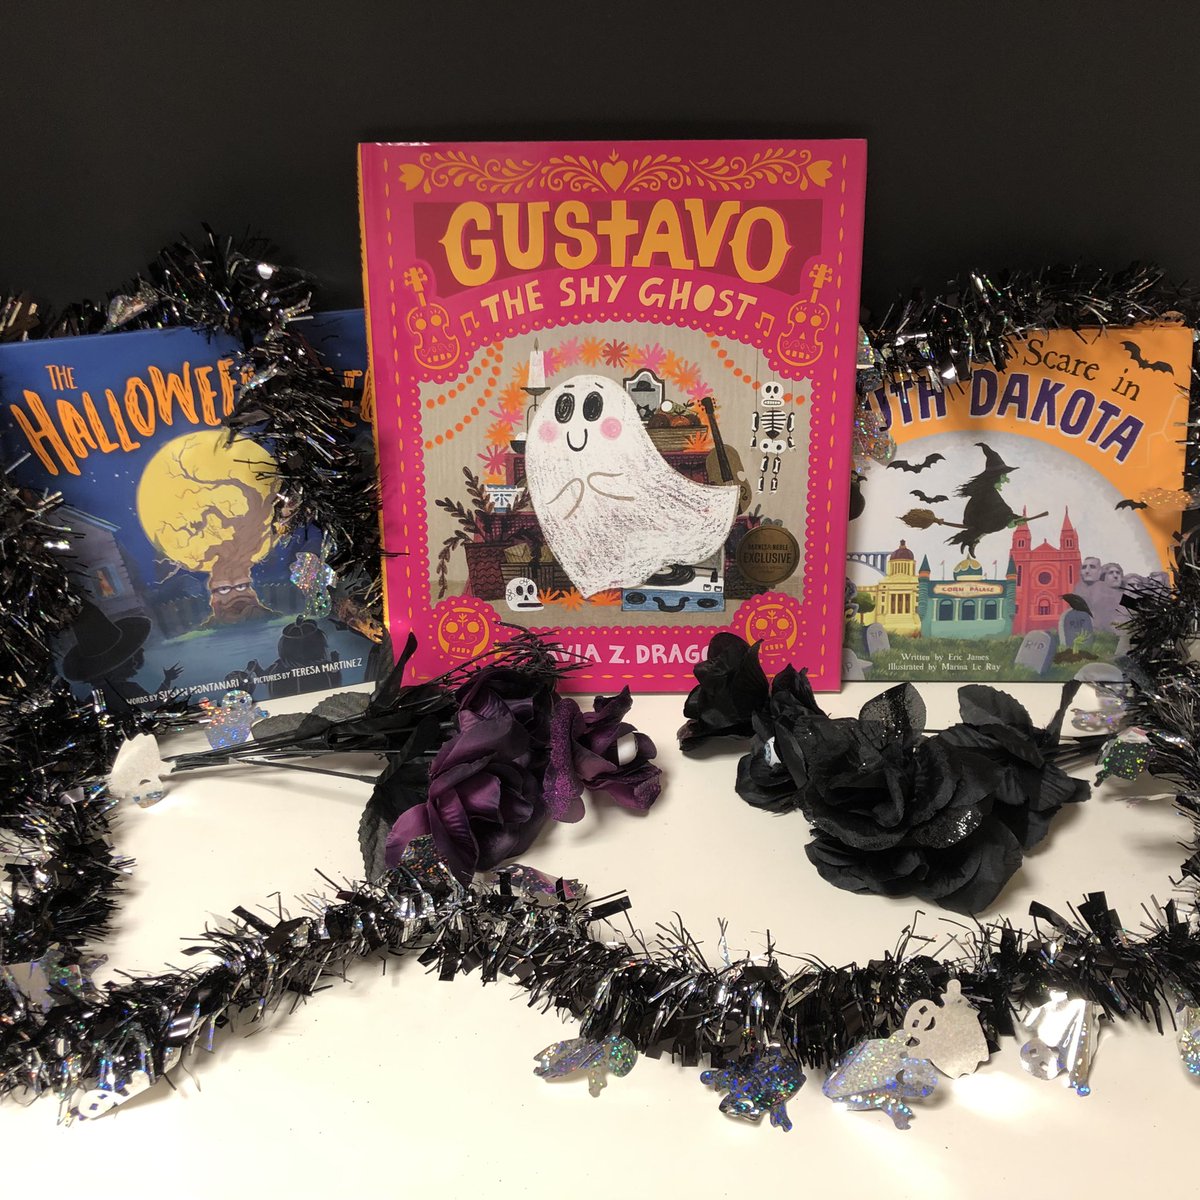 September 1st means we are officially into Spooky Season! And we have a brand new Purchase With Purchase that fits the theme perfectly. Get Gustavo the Shy Ghost for $9.99 with the purchase of any other kids book!